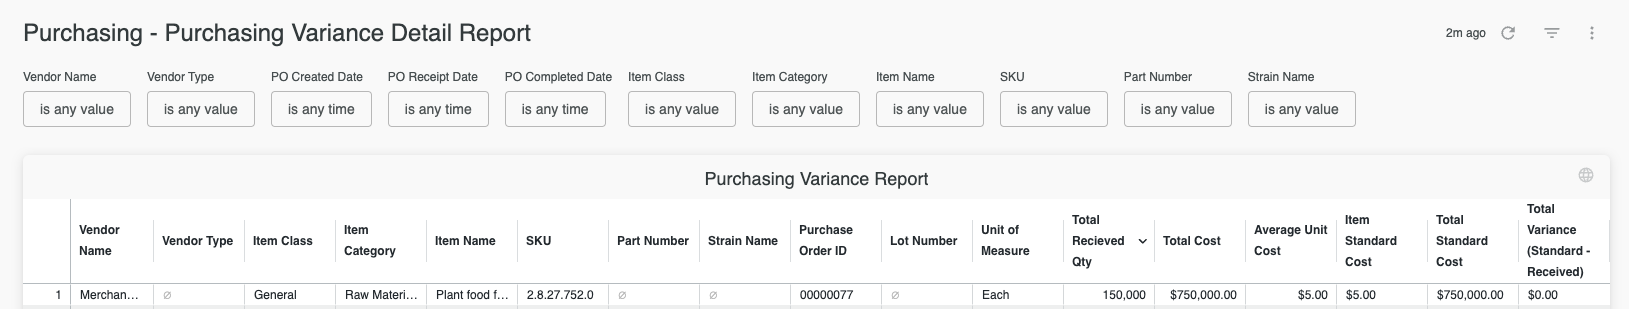 the new "Purchasing - Purchasing Variance Detail Report" and showing its filters and columns.